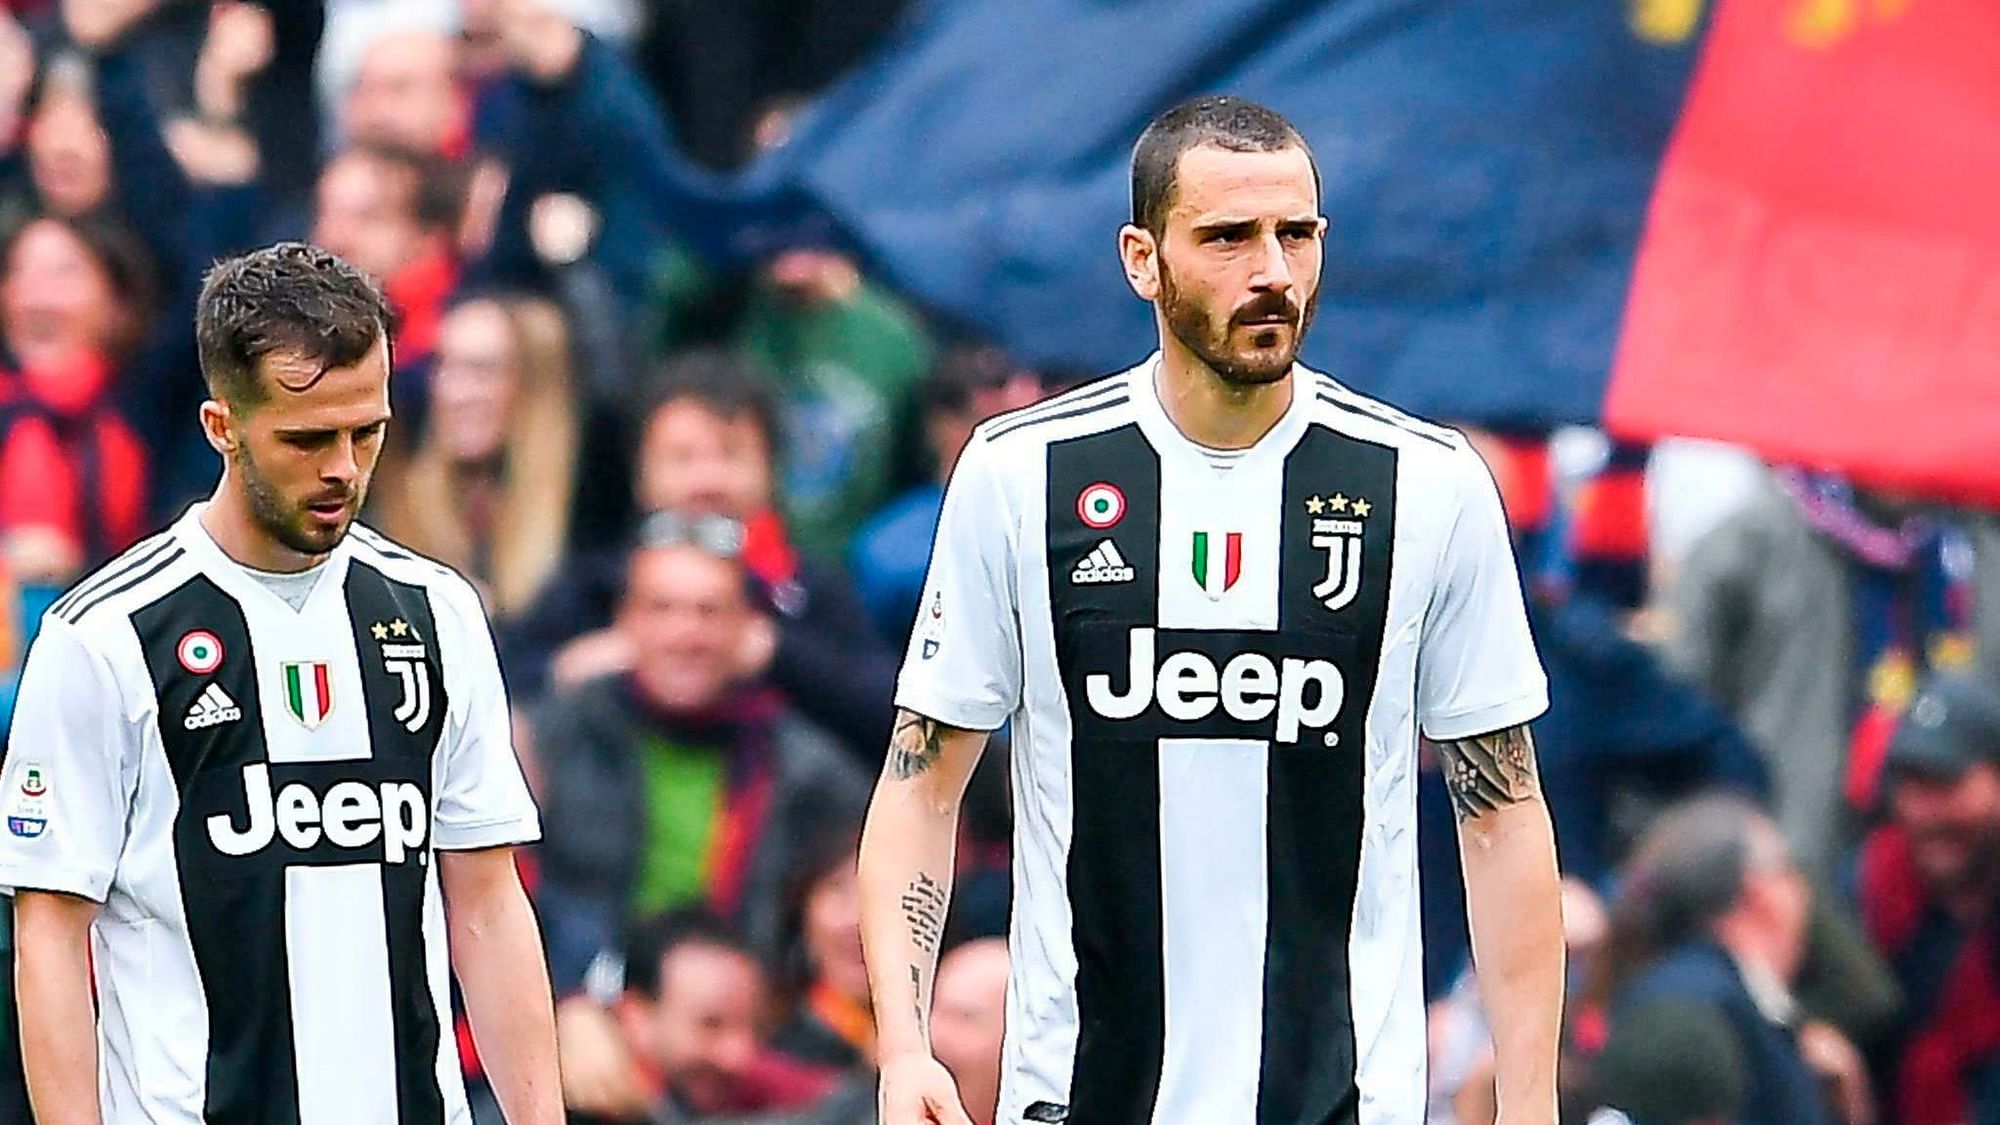 Miralem Pjanic (left) and Leonardo Bonucci walk in dejection after Juventus lost at Genoa to suffer their first defeat of the 2018/19 Serie A season.